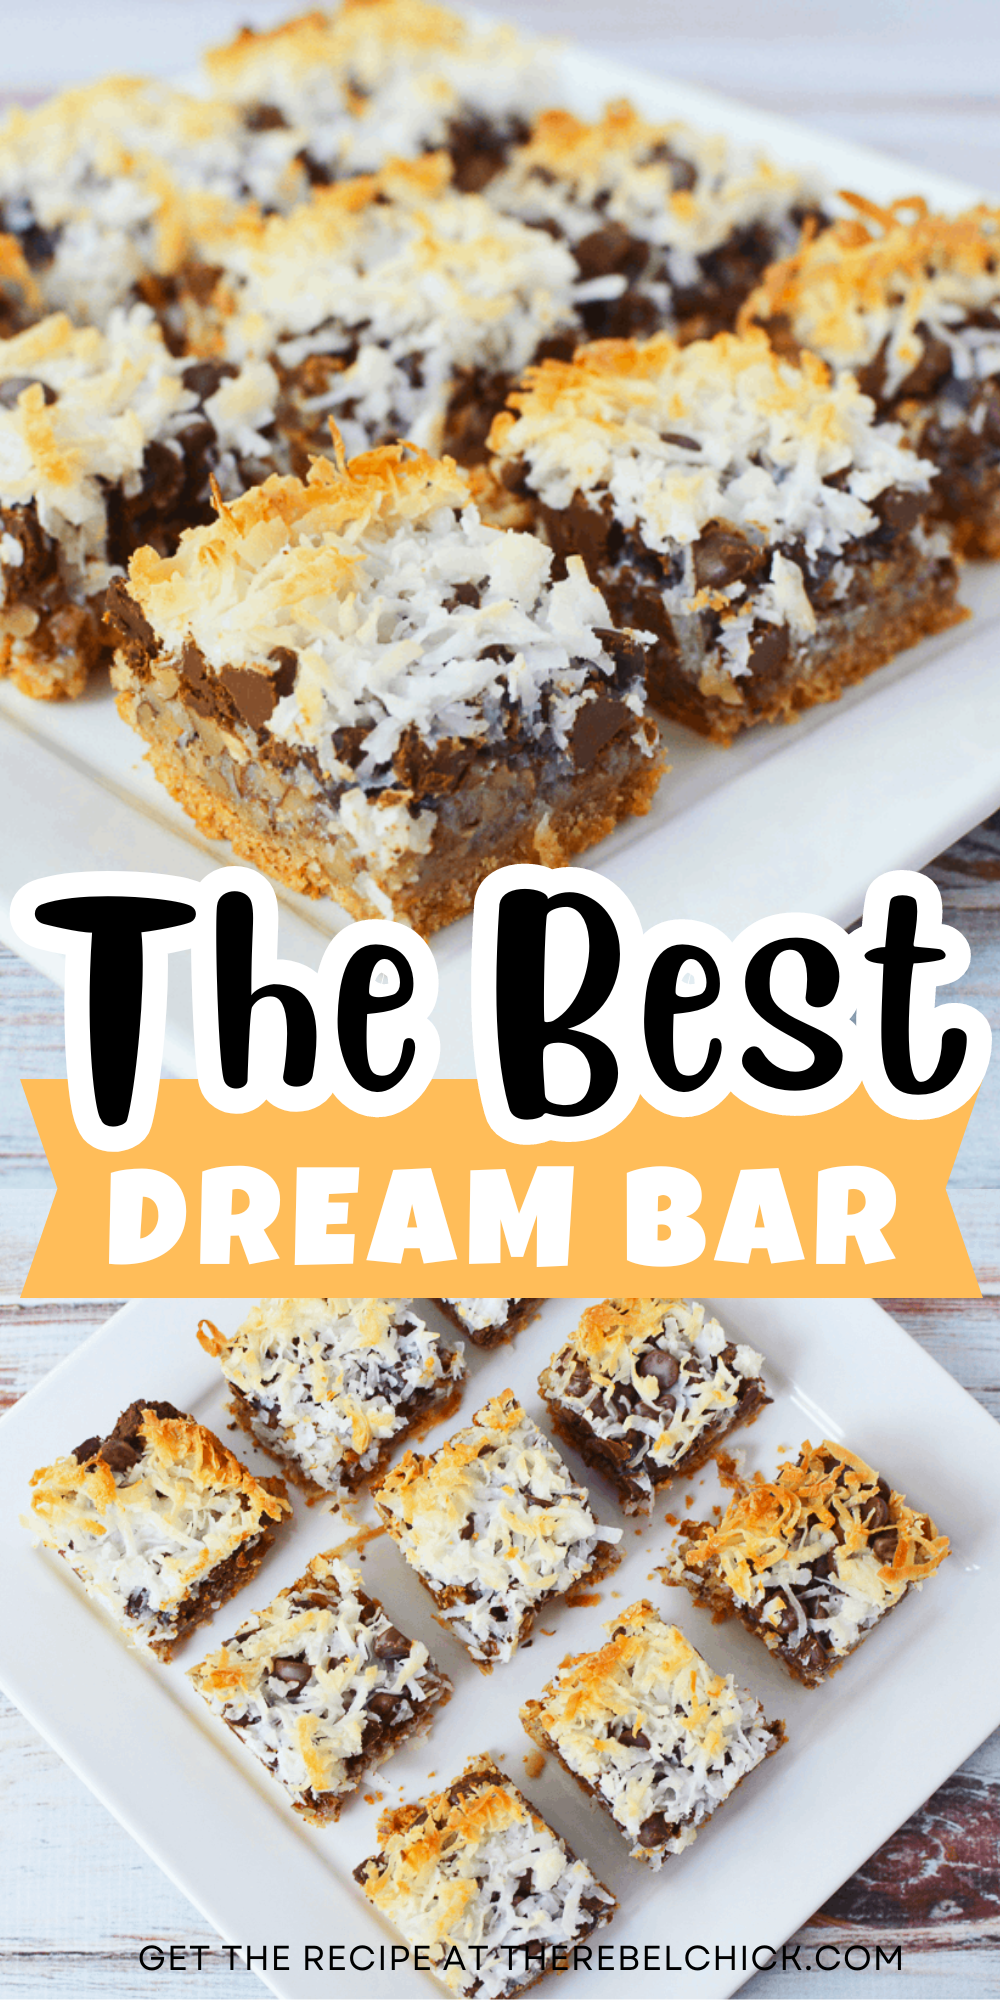 Dream Bar with chocolate chips and covered in toasted coconut flakes